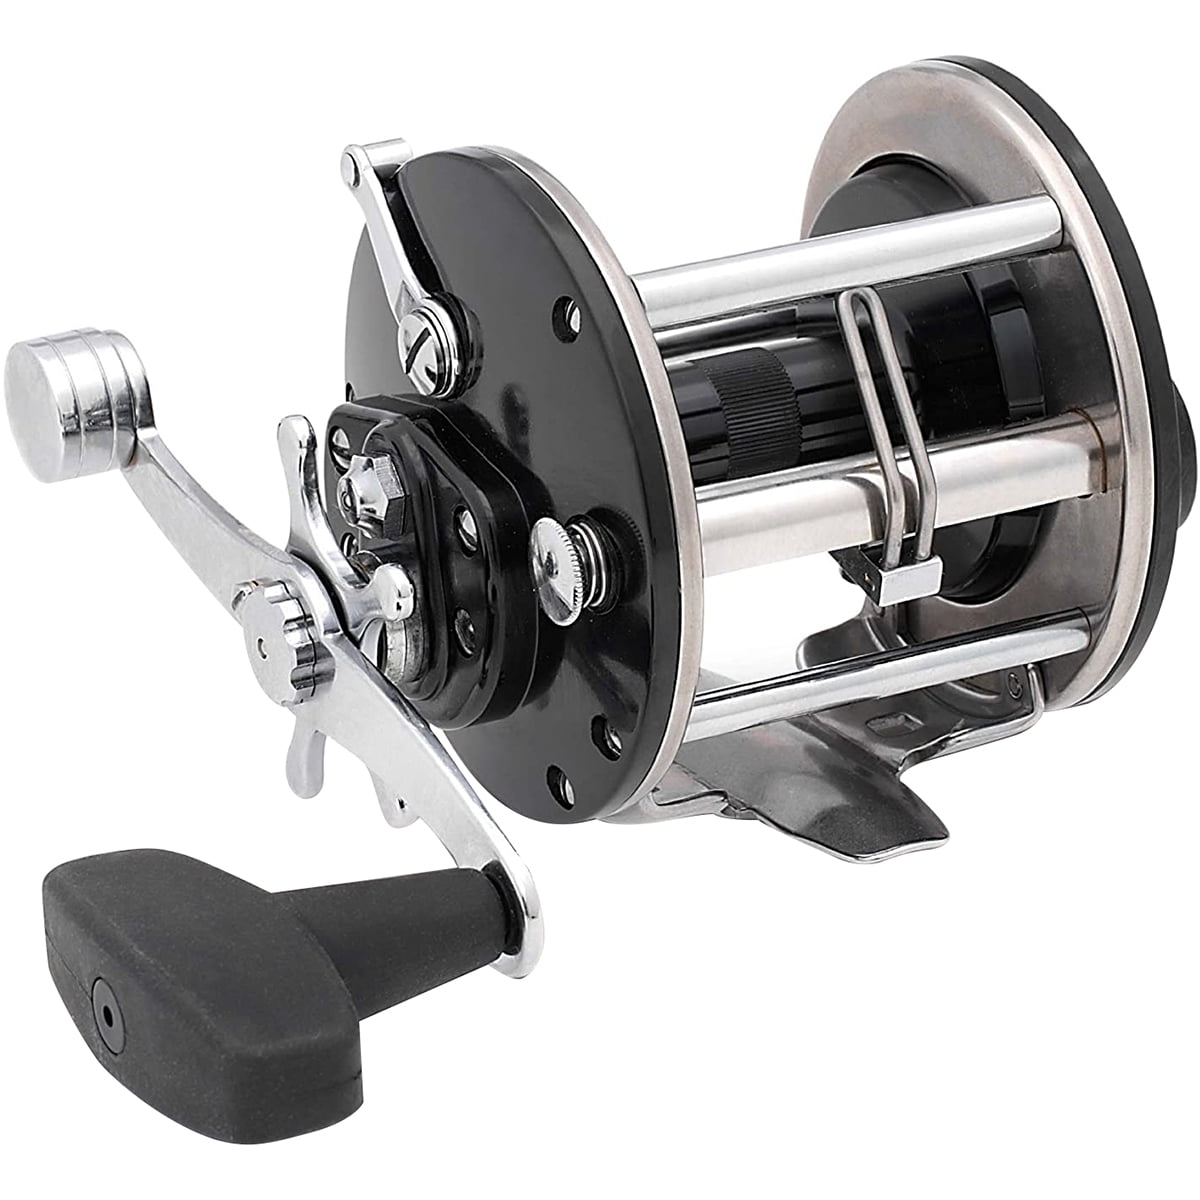 What to Look for in a Saltwater Reel